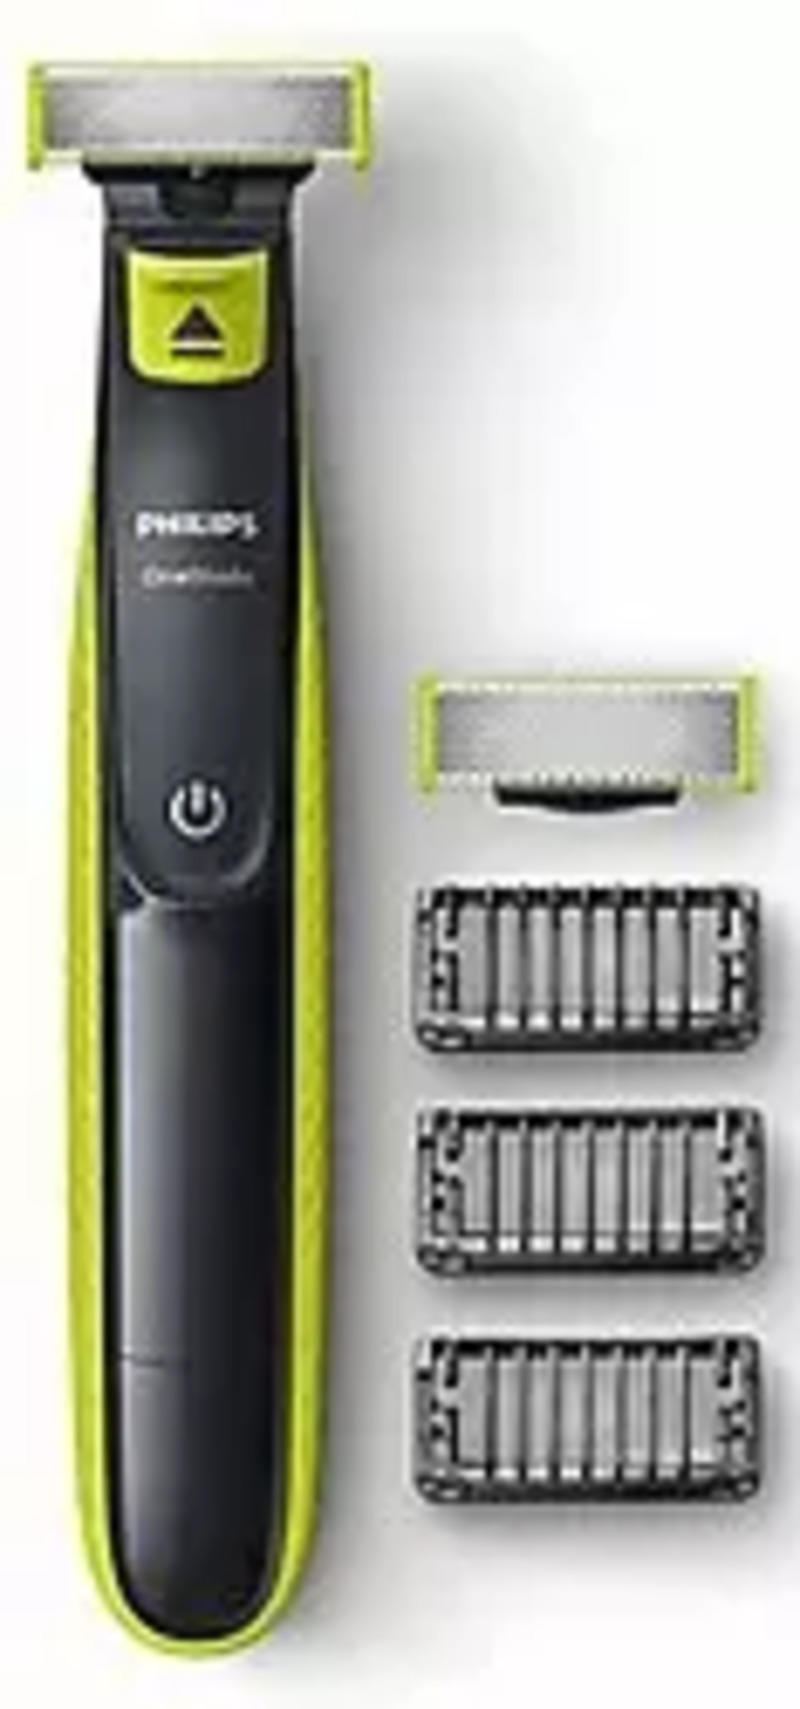 Philips OneBlade QP2525/10+blade Trimmer for Beard & Moustache (Black  Green) Price in India, Specifications and Review